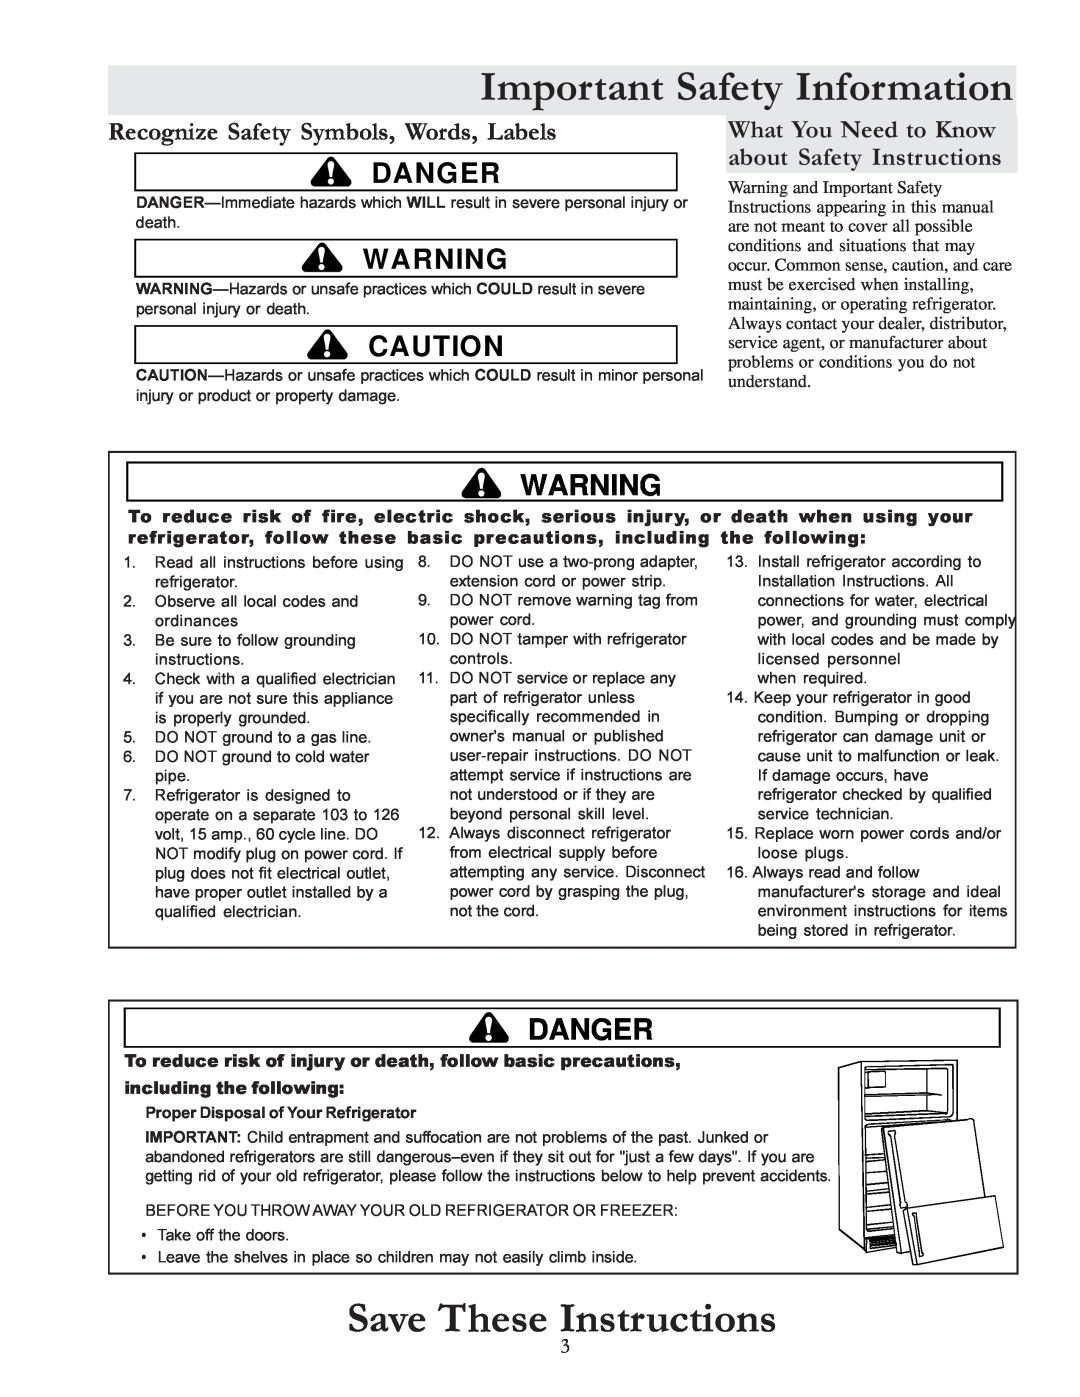 Amana W10175445A Important Safety Information, Save These Instructions, Danger, Recognize Safety Symbols, Words, Labels 